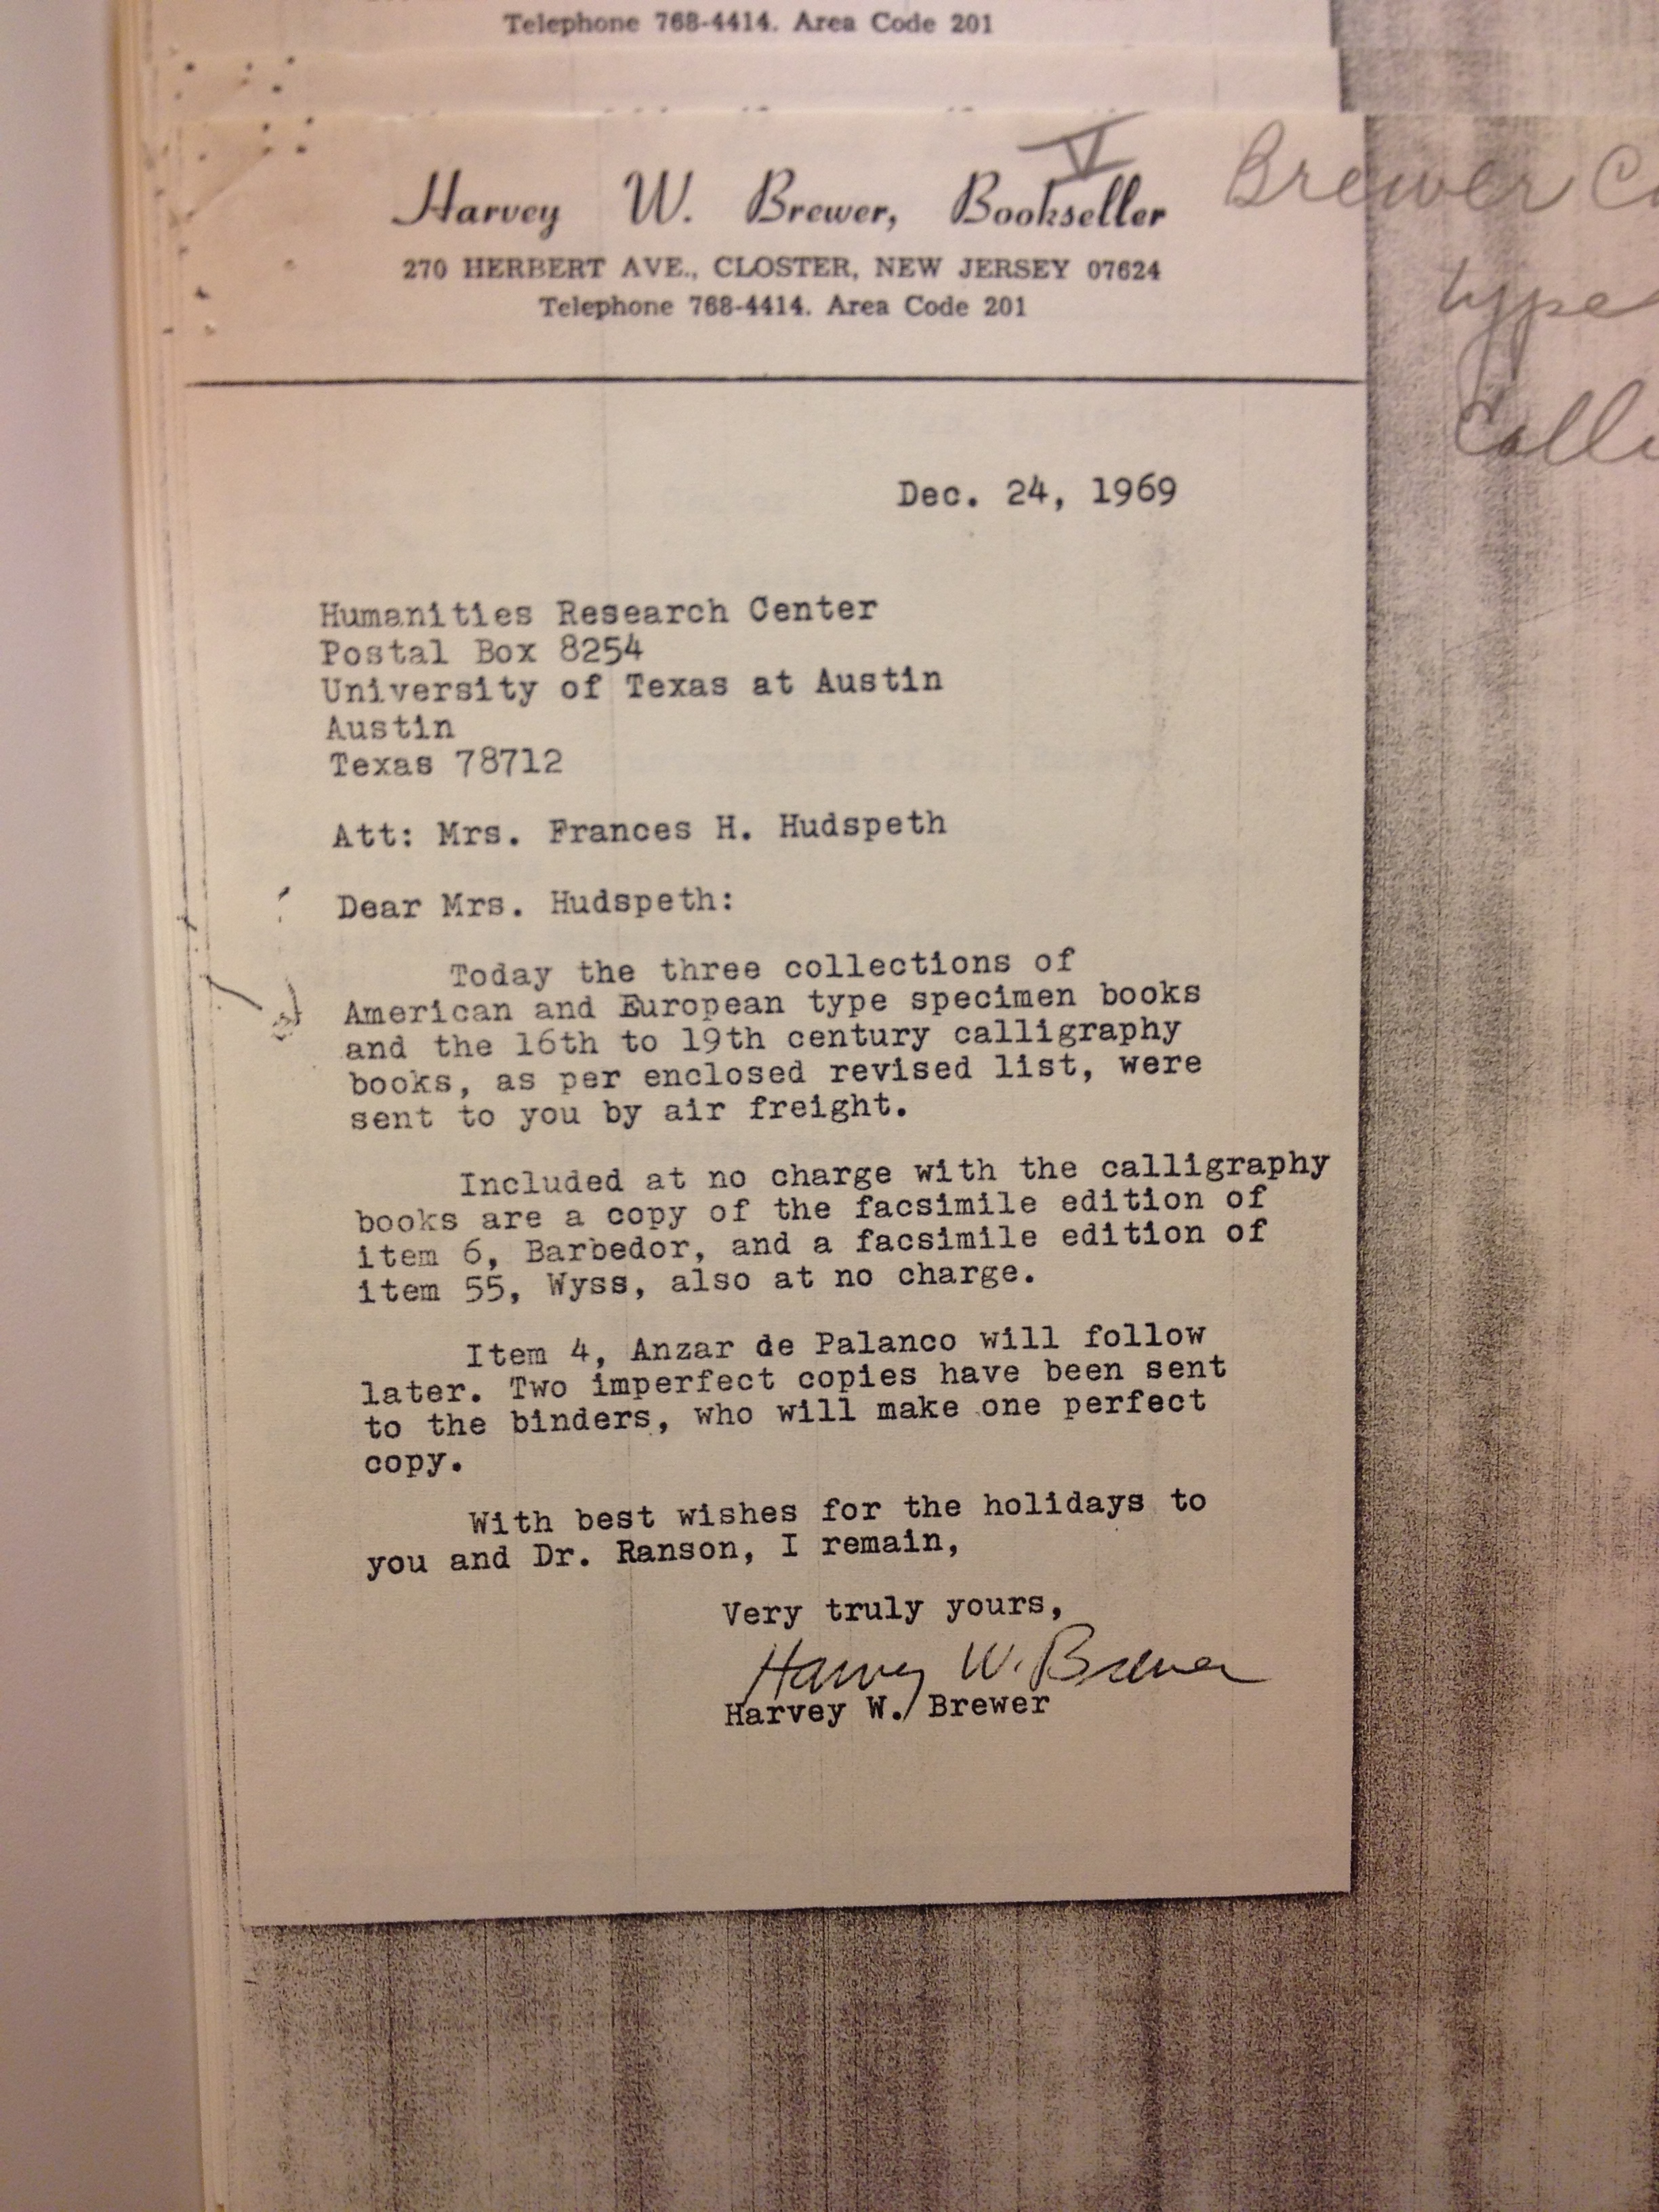 Letter from Harvey W. Brewer to Mrs. Hudspeth at the Humanities Research Center describing shipment of type specimens and writing manuals in 1969